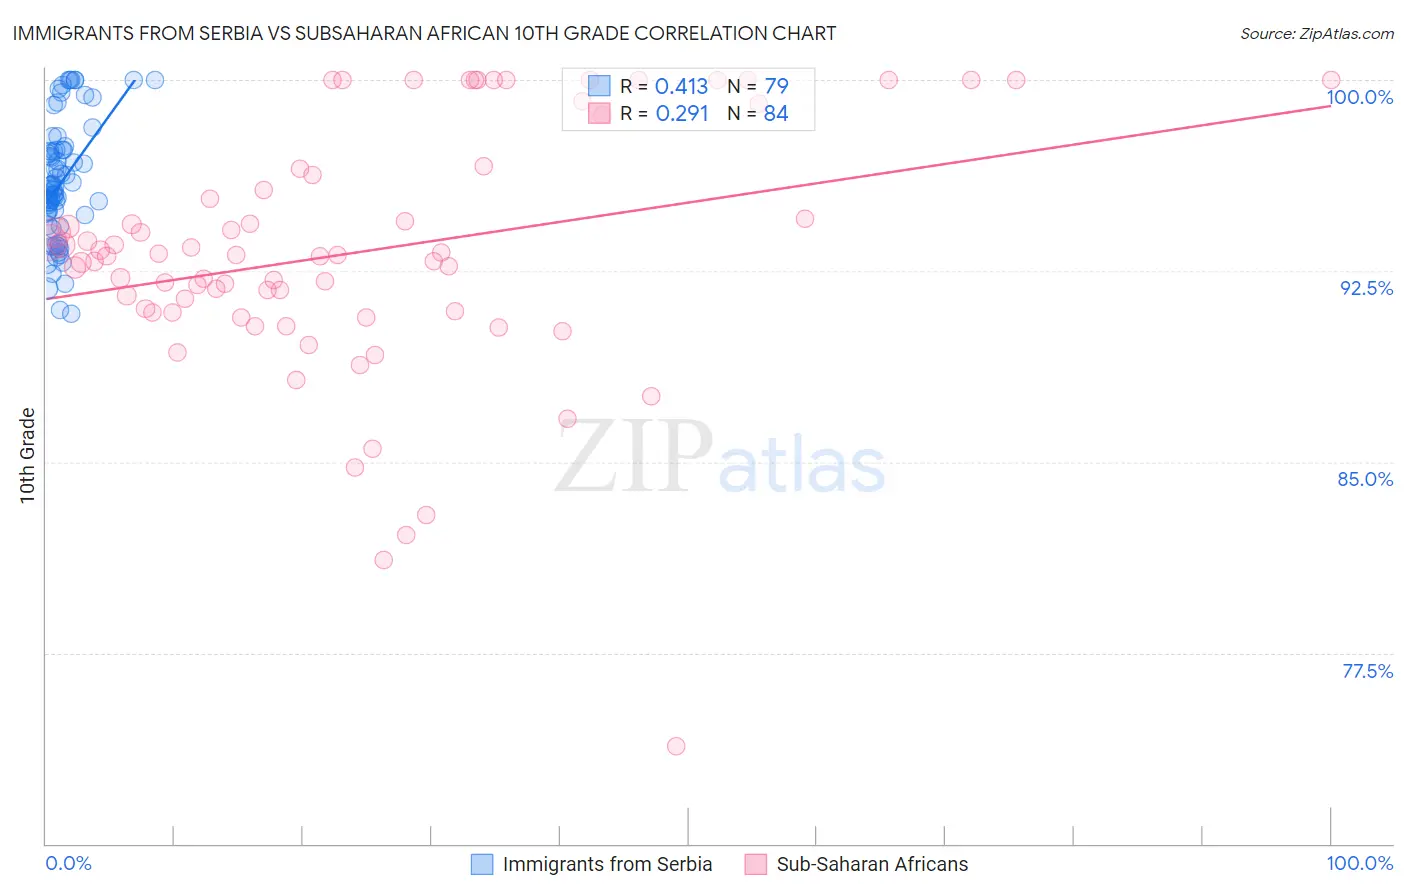 Immigrants from Serbia vs Subsaharan African 10th Grade